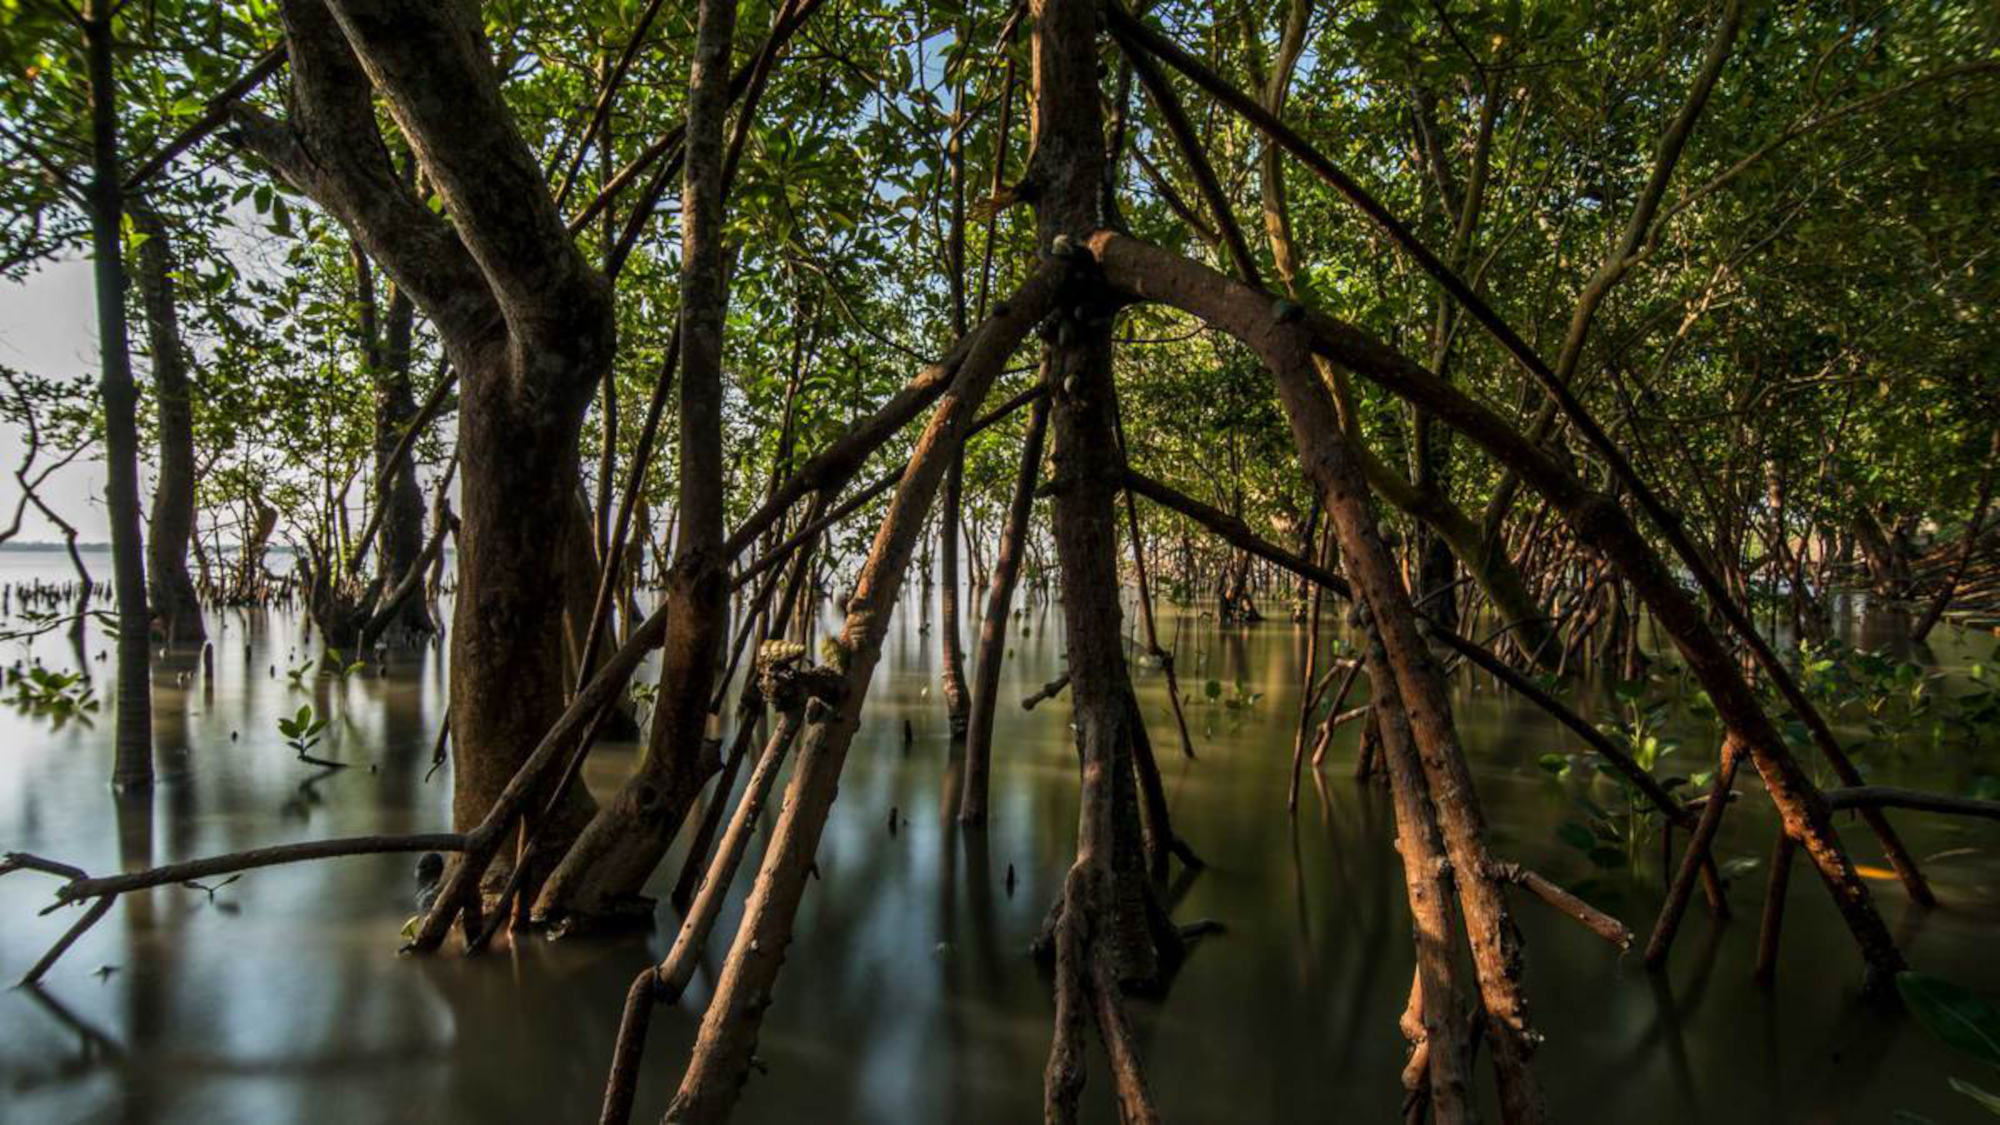 Section of a mangrove forest